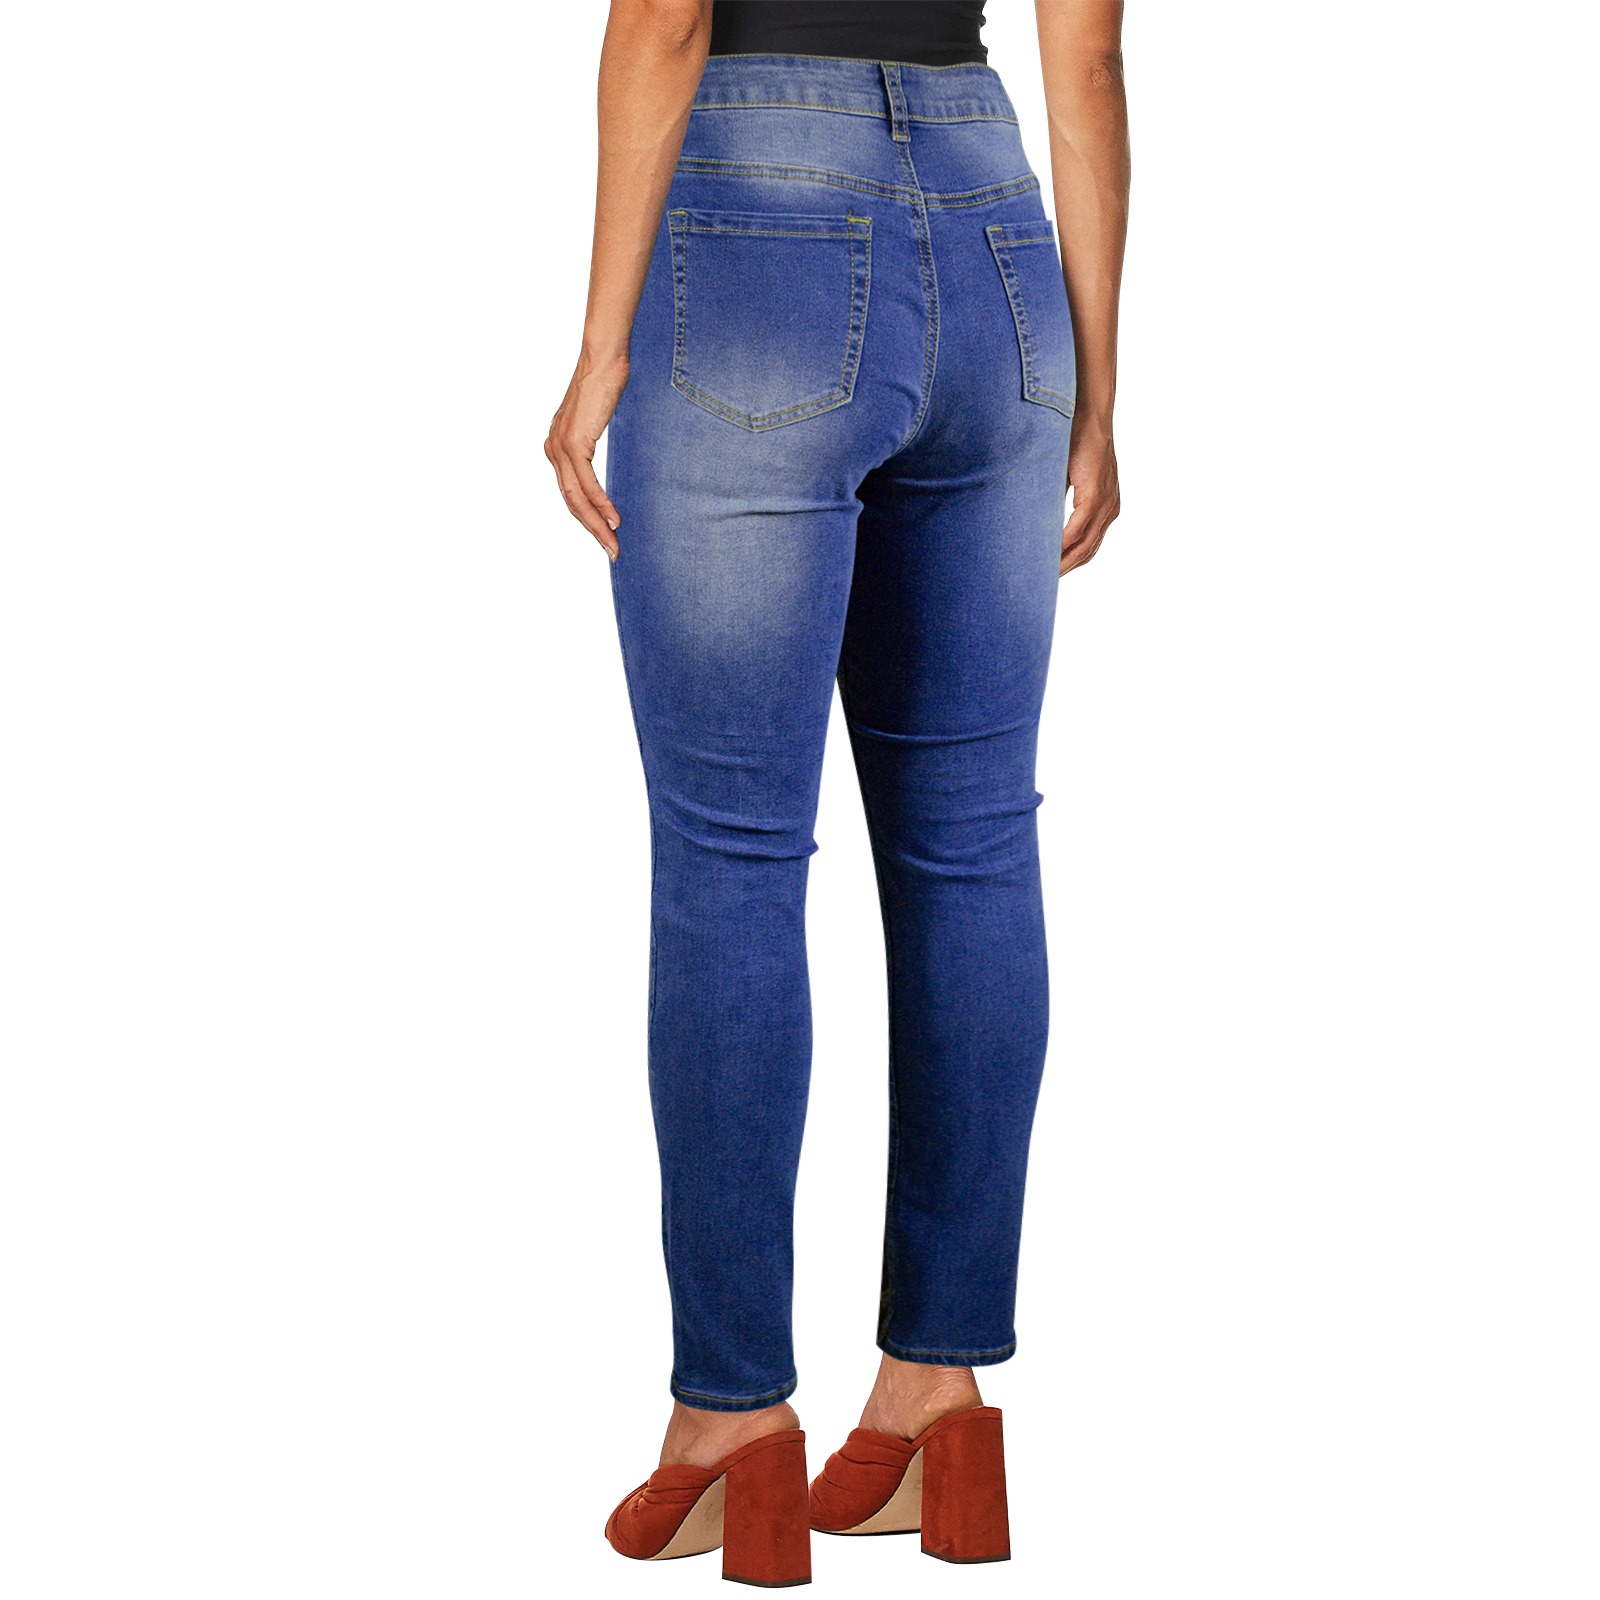 Adult humor. Fig sign. Strong rejection. No way. Women's Jeans (Front Printing)